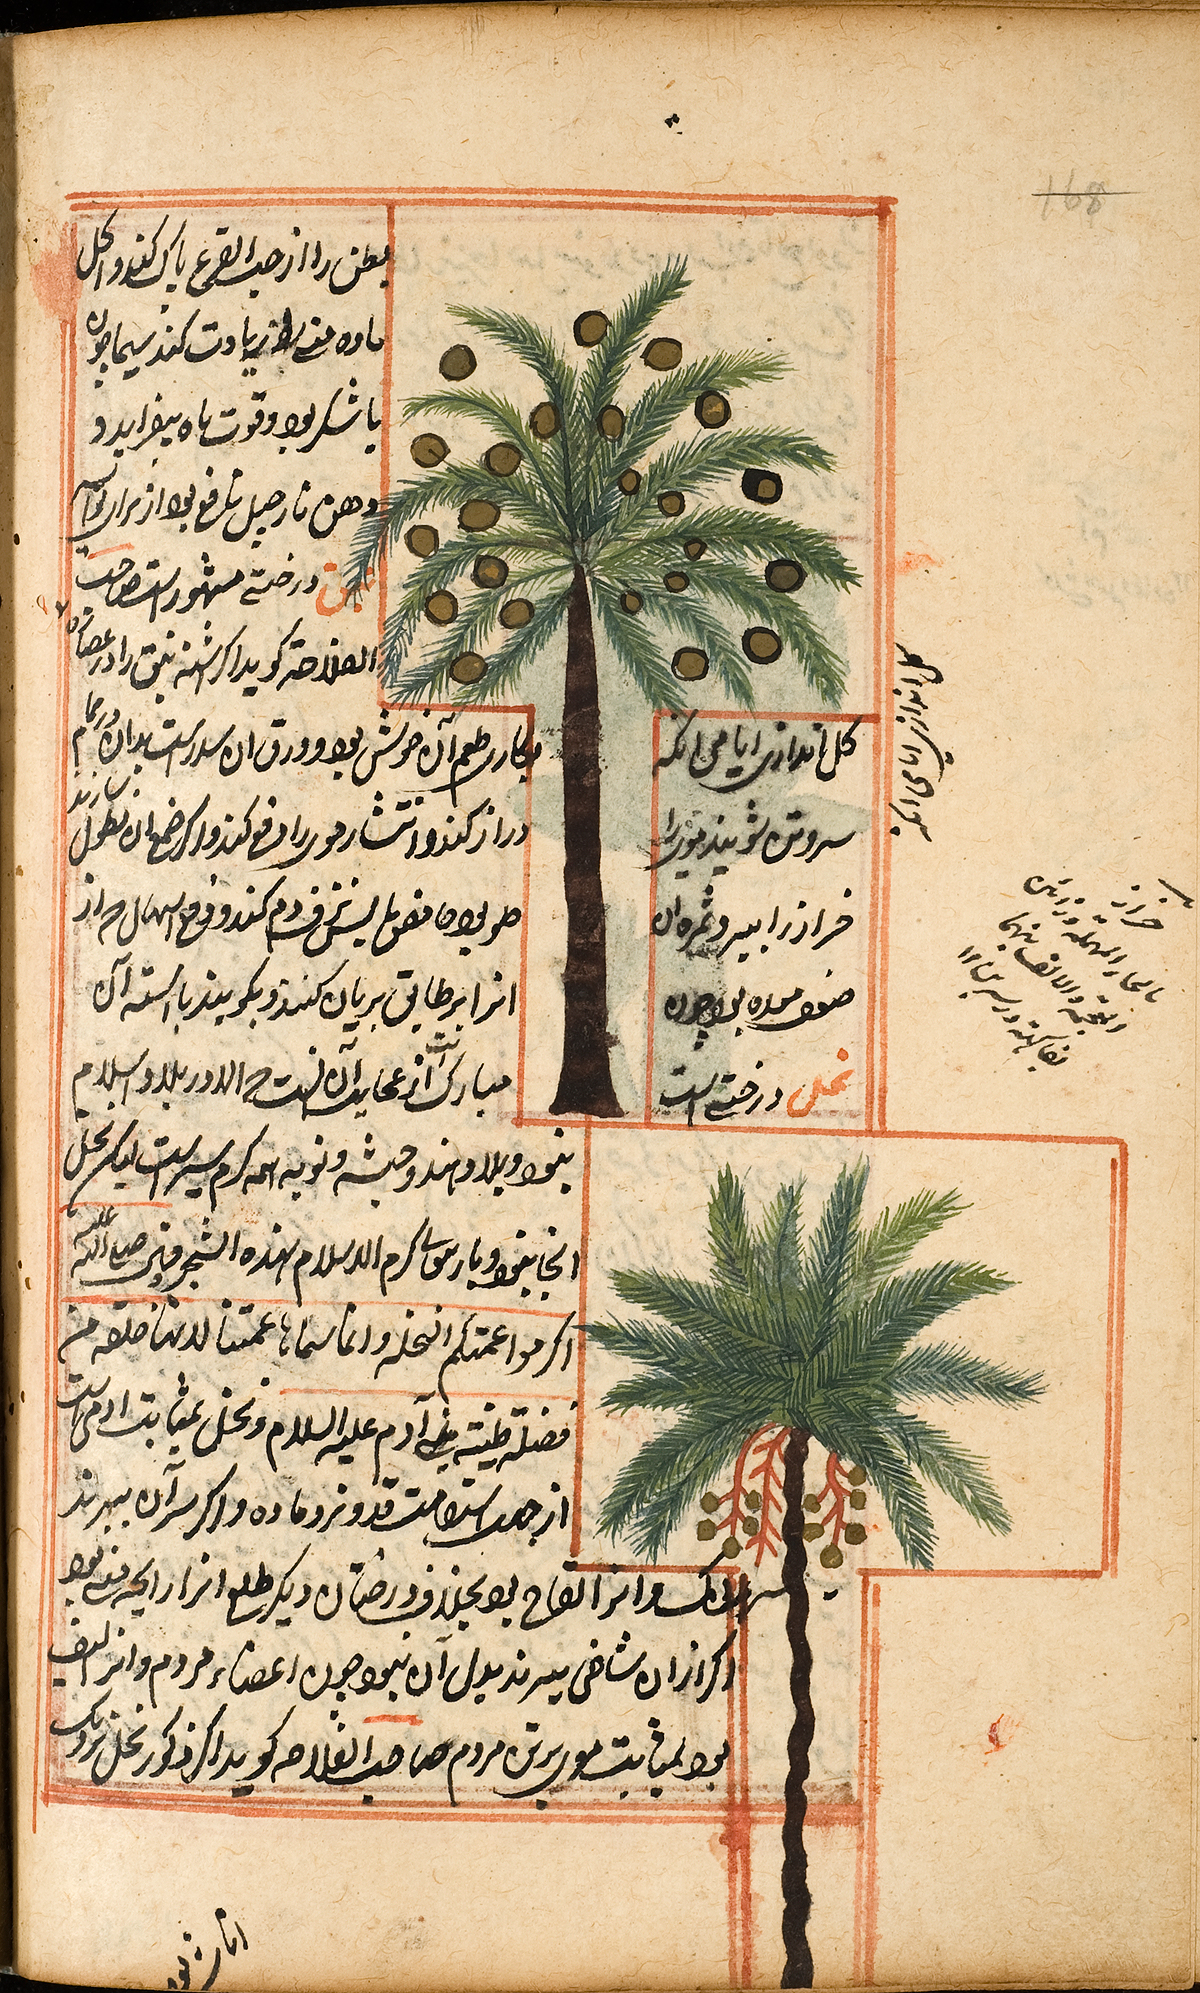 A coconut tree, tall with pinnate green leaves and coconuts, and a palm tree, tall with pinnate green leaves and dates streaming down like vines, surrounded by Persian text and a red double ruled border.